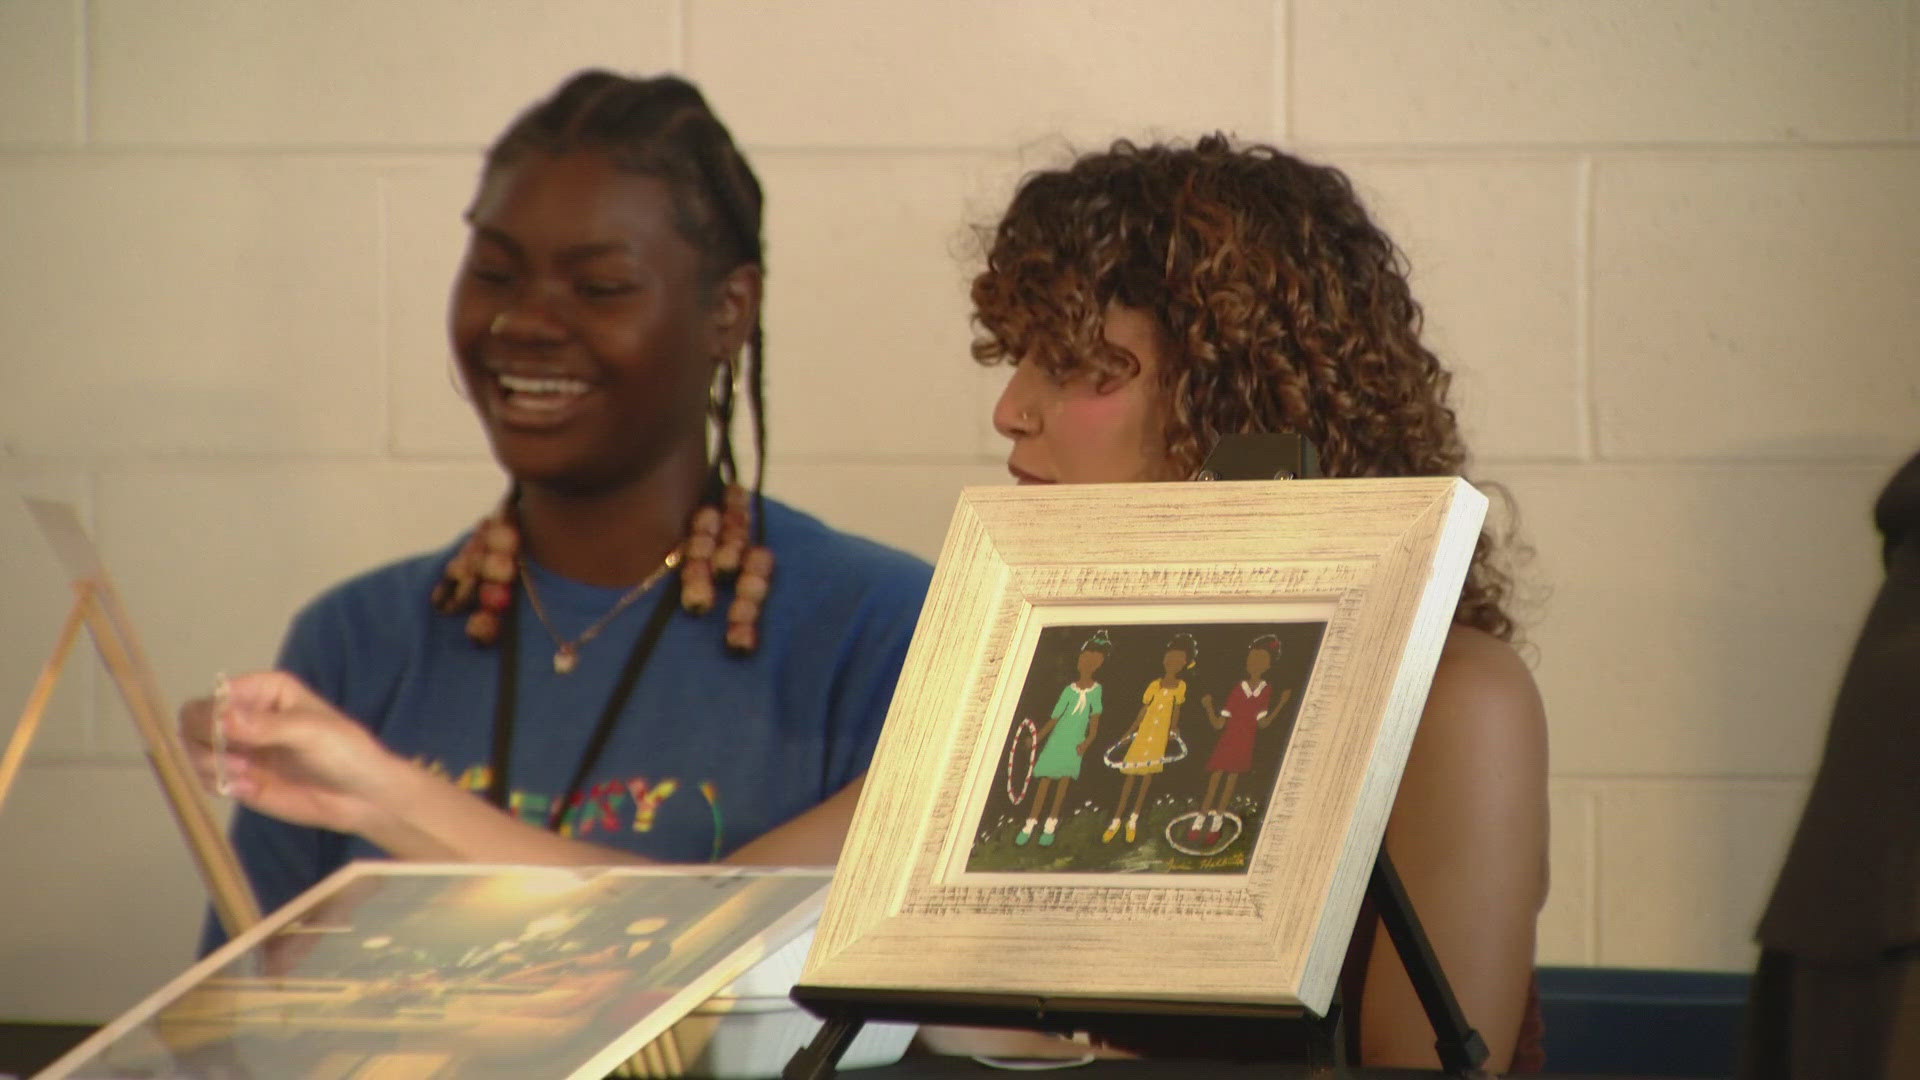 Students got $500 to buy new art for their schools.